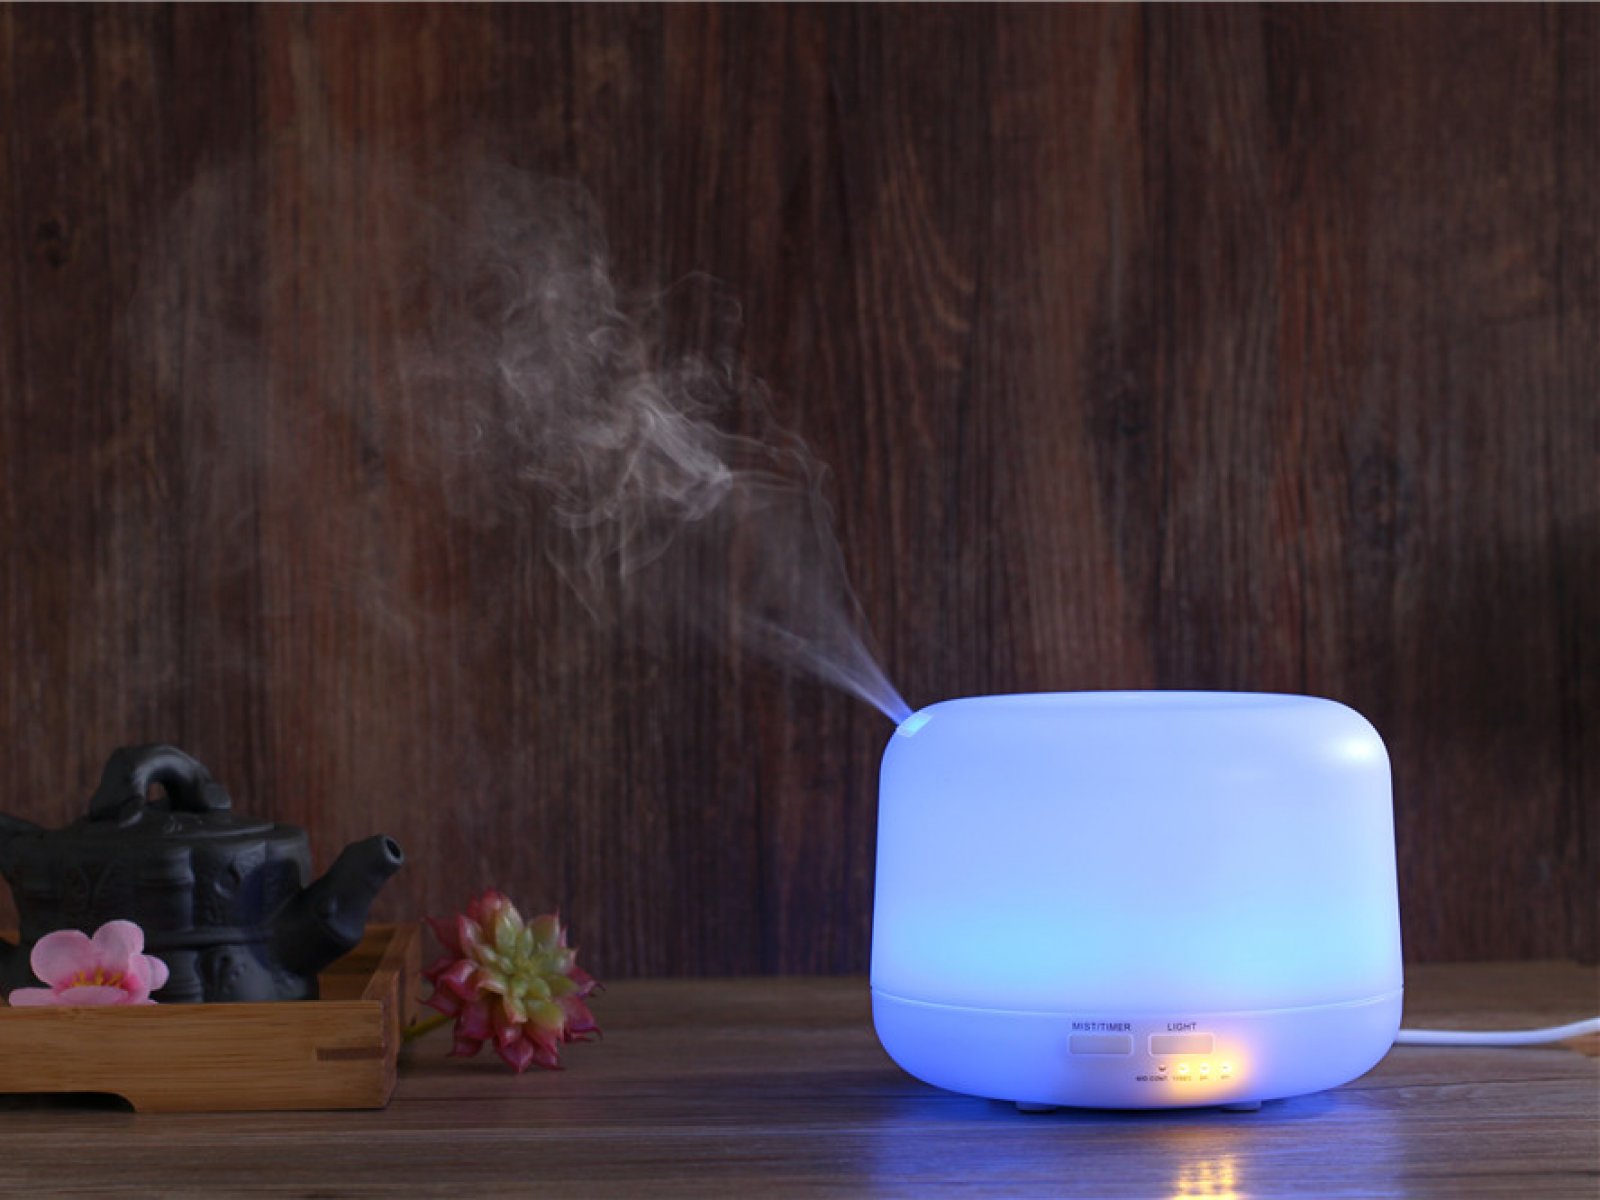 Aroma diffuser FAVORIT + essential oil blend BEWIT 33, 5 ml -  - 9